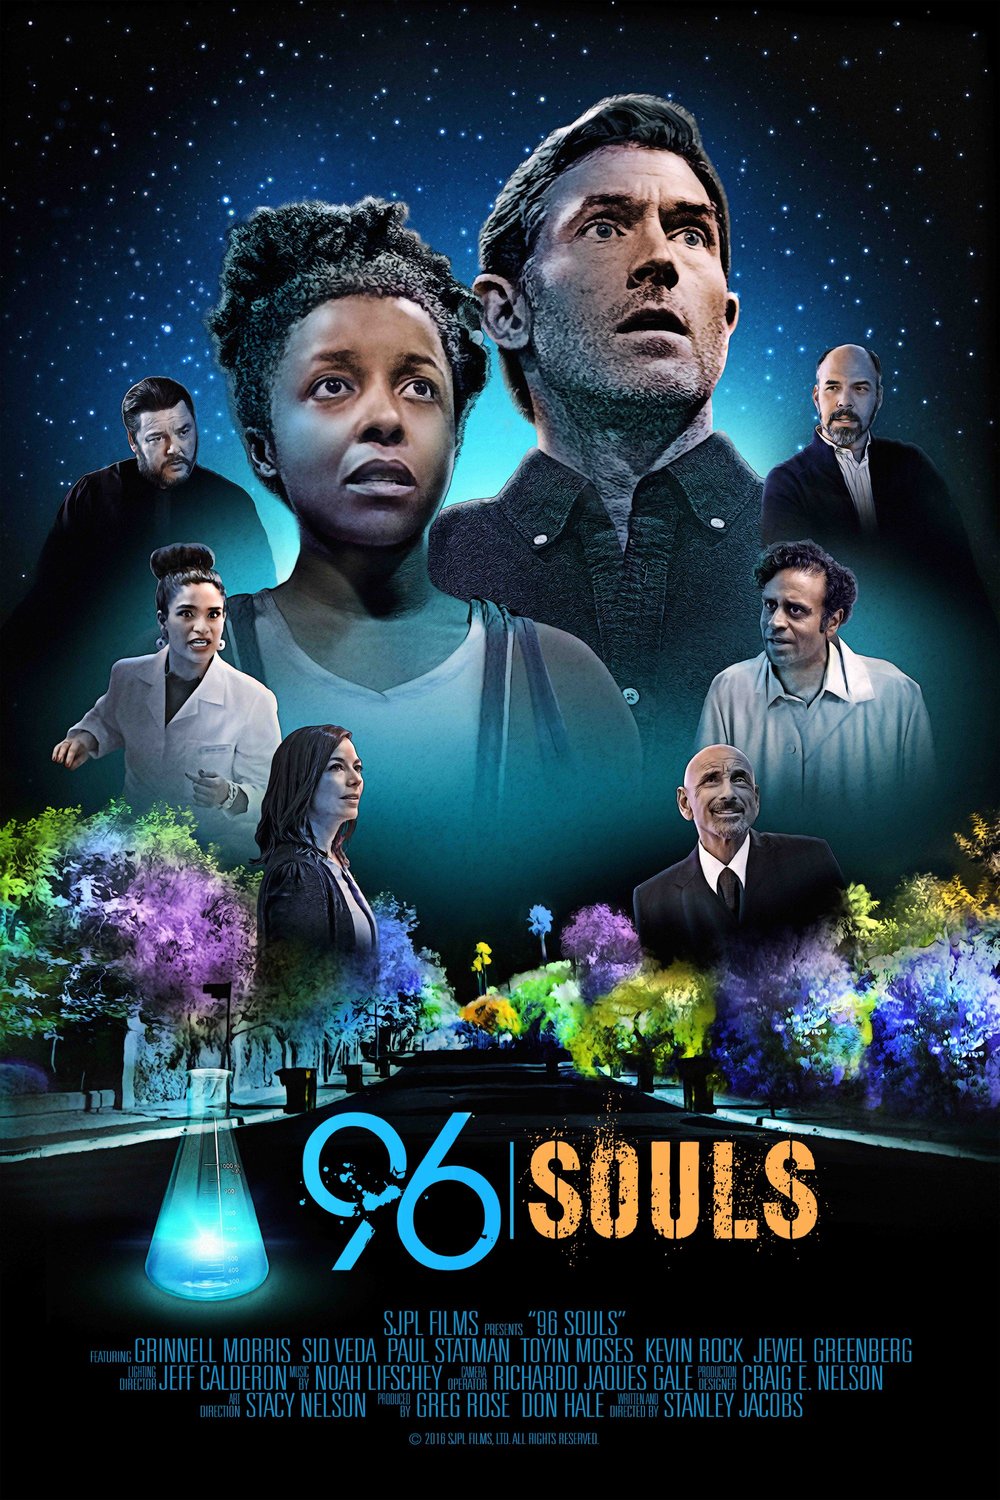 Poster of the movie 96 Souls